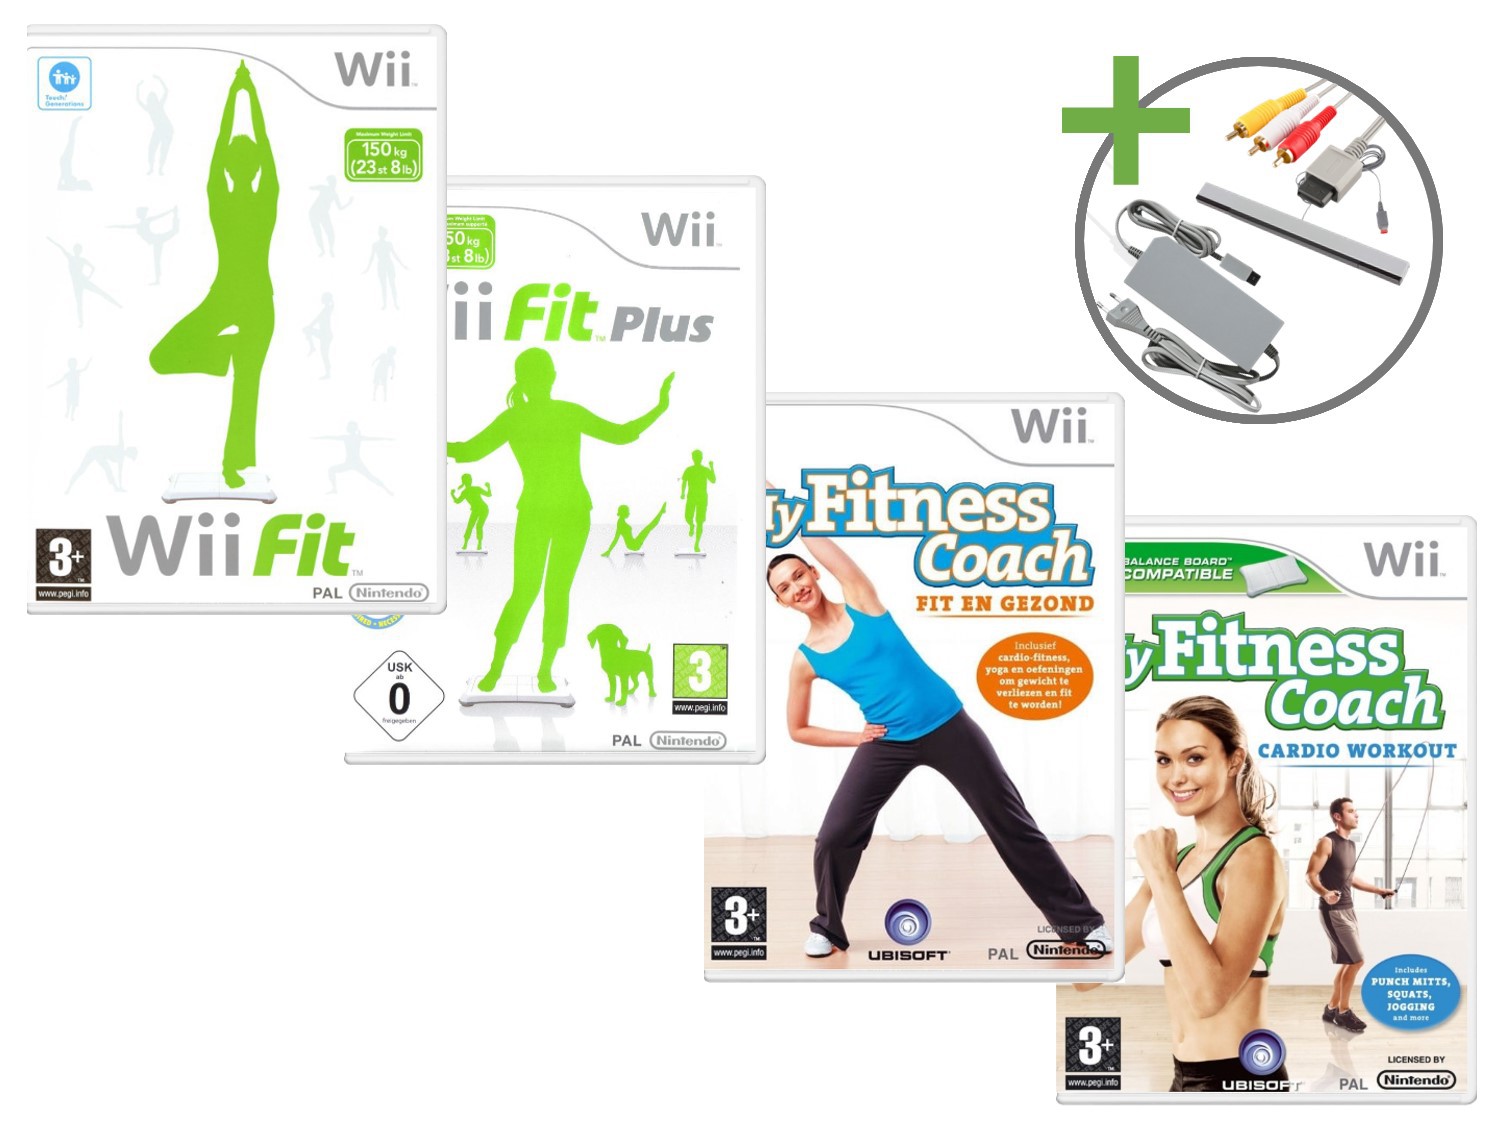 Nintendo Wii Starter Pack - The First of January Edition - Wii Hardware - 5